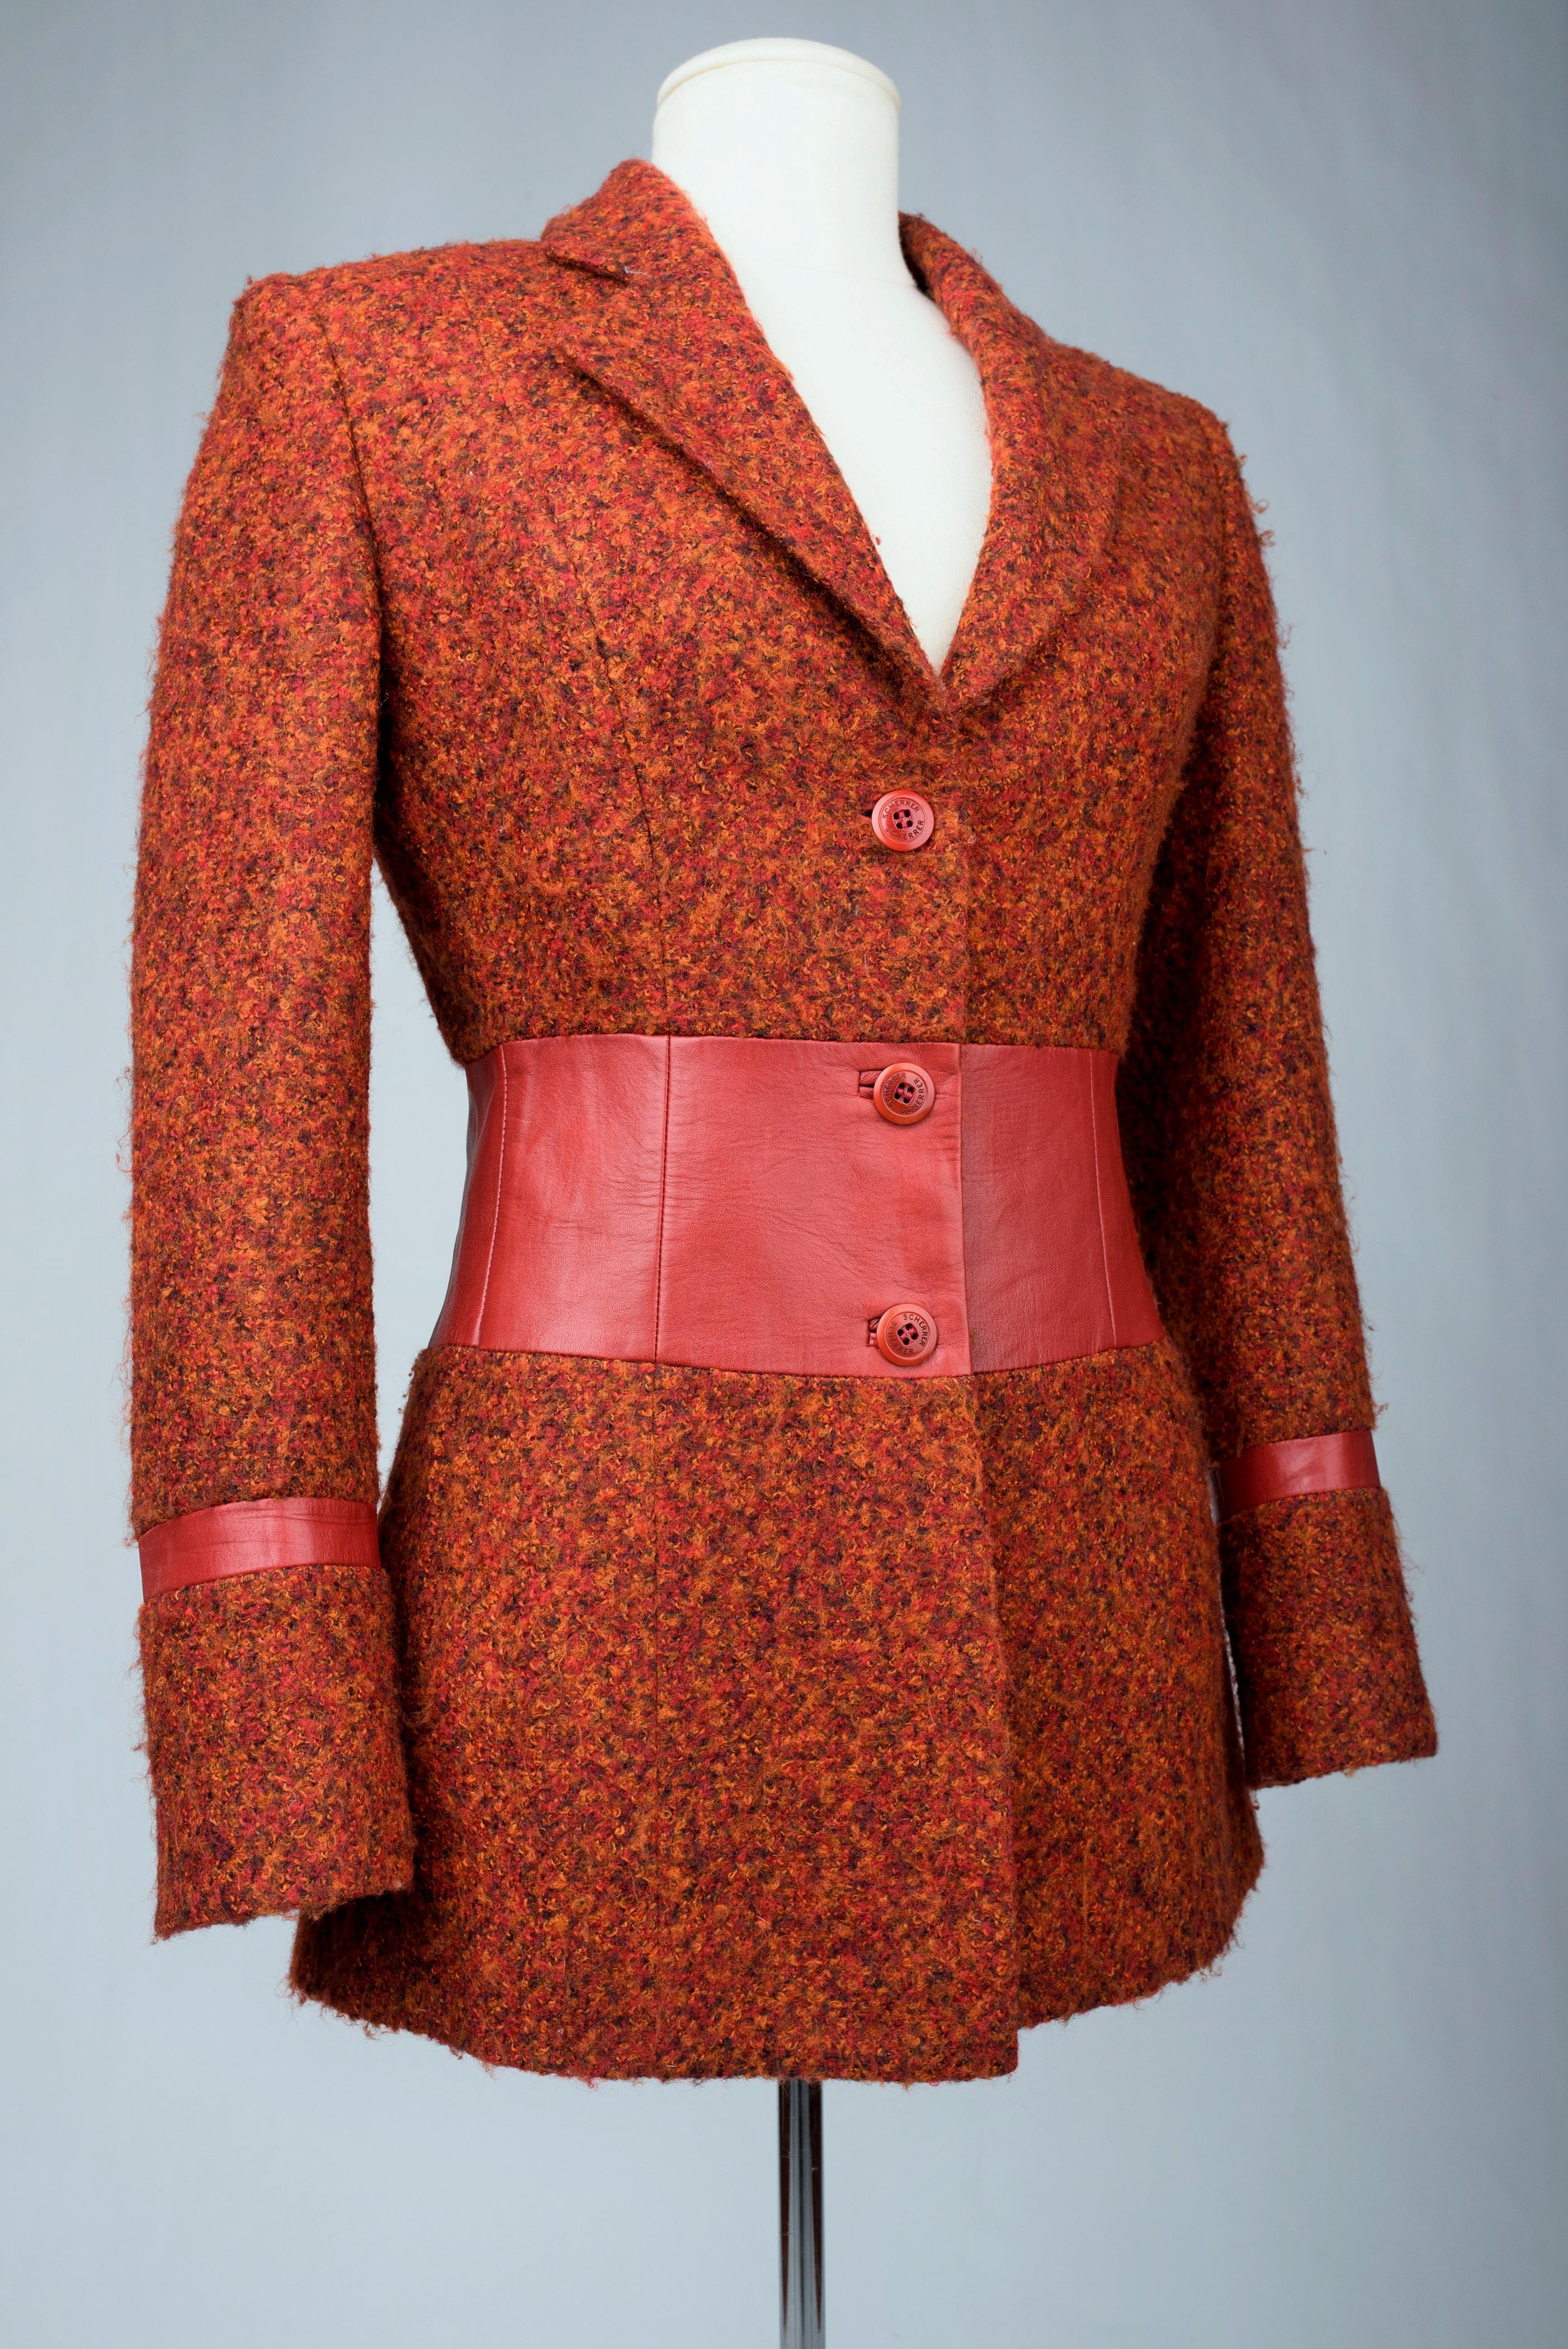 Circa 2000 - 2010

France

Beautiful blazer jacket in mottled wool with a blood red leather band, from the Cuir collection of the Maison Jean-Louis Scherrer dating from 2000. Fitted jacket with two side slit pockets and real leather appliqué